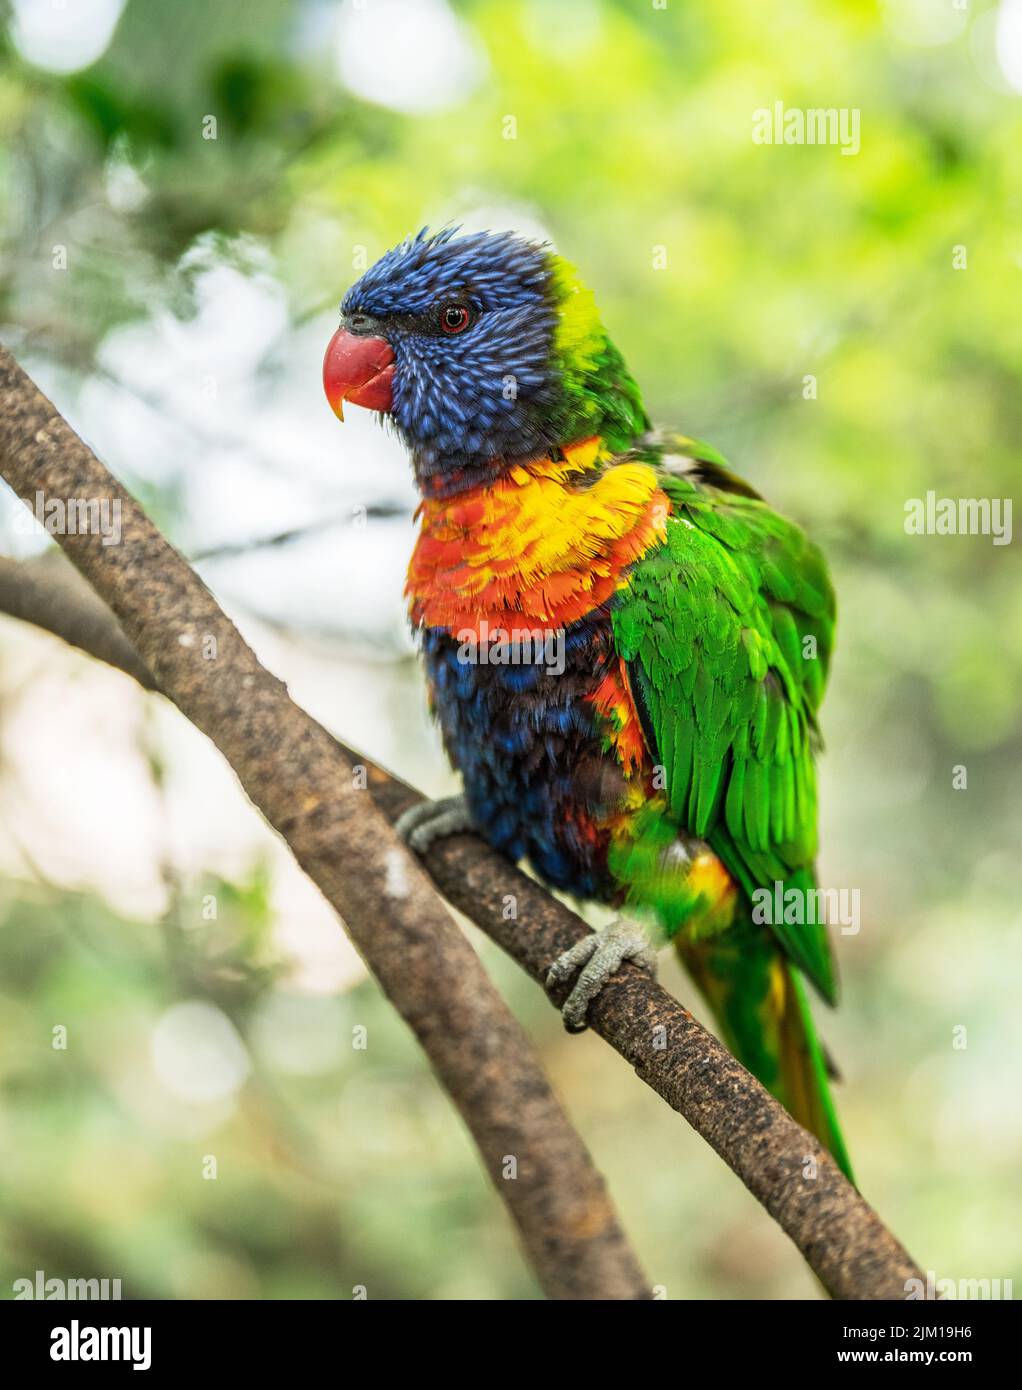 Coconut lorikeet or colorful parrot sitting on a branch. Stock Photo